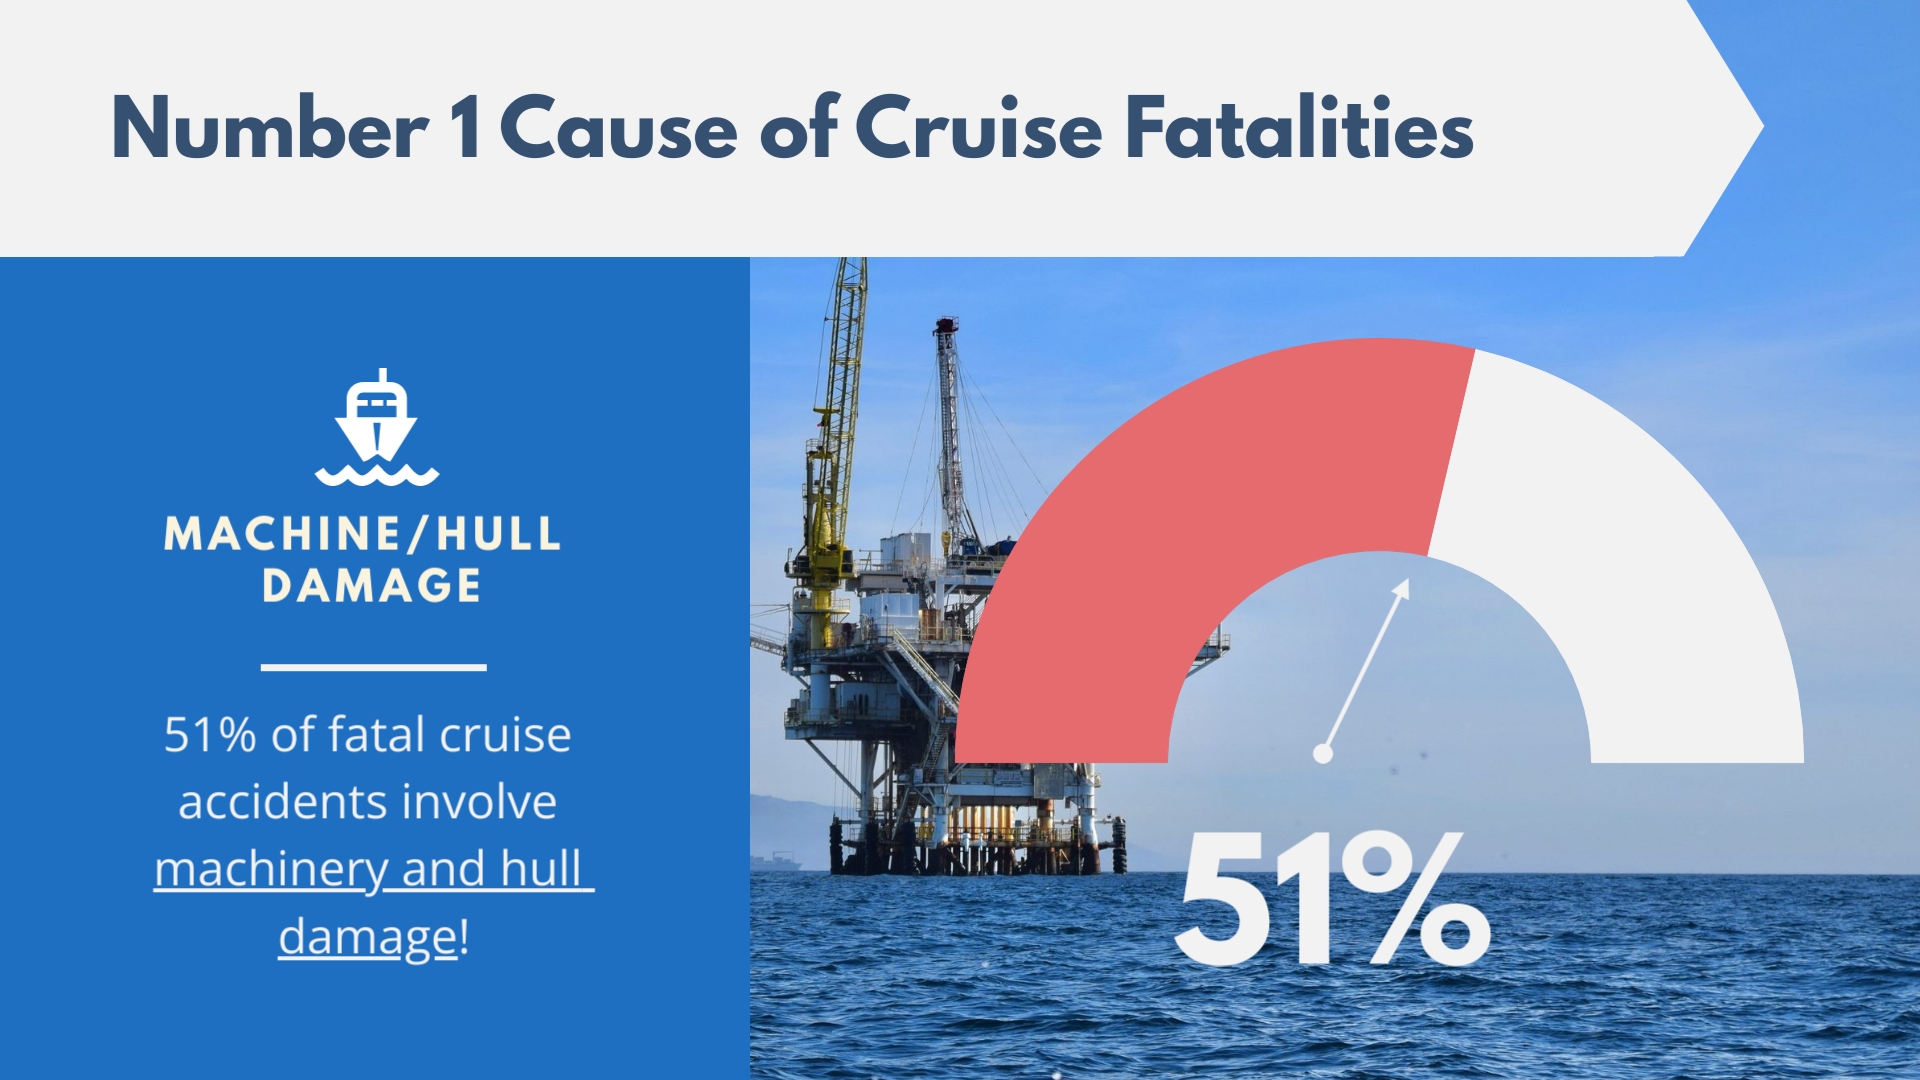 51% of fatal cruise accidents involve machinery and hull damage!